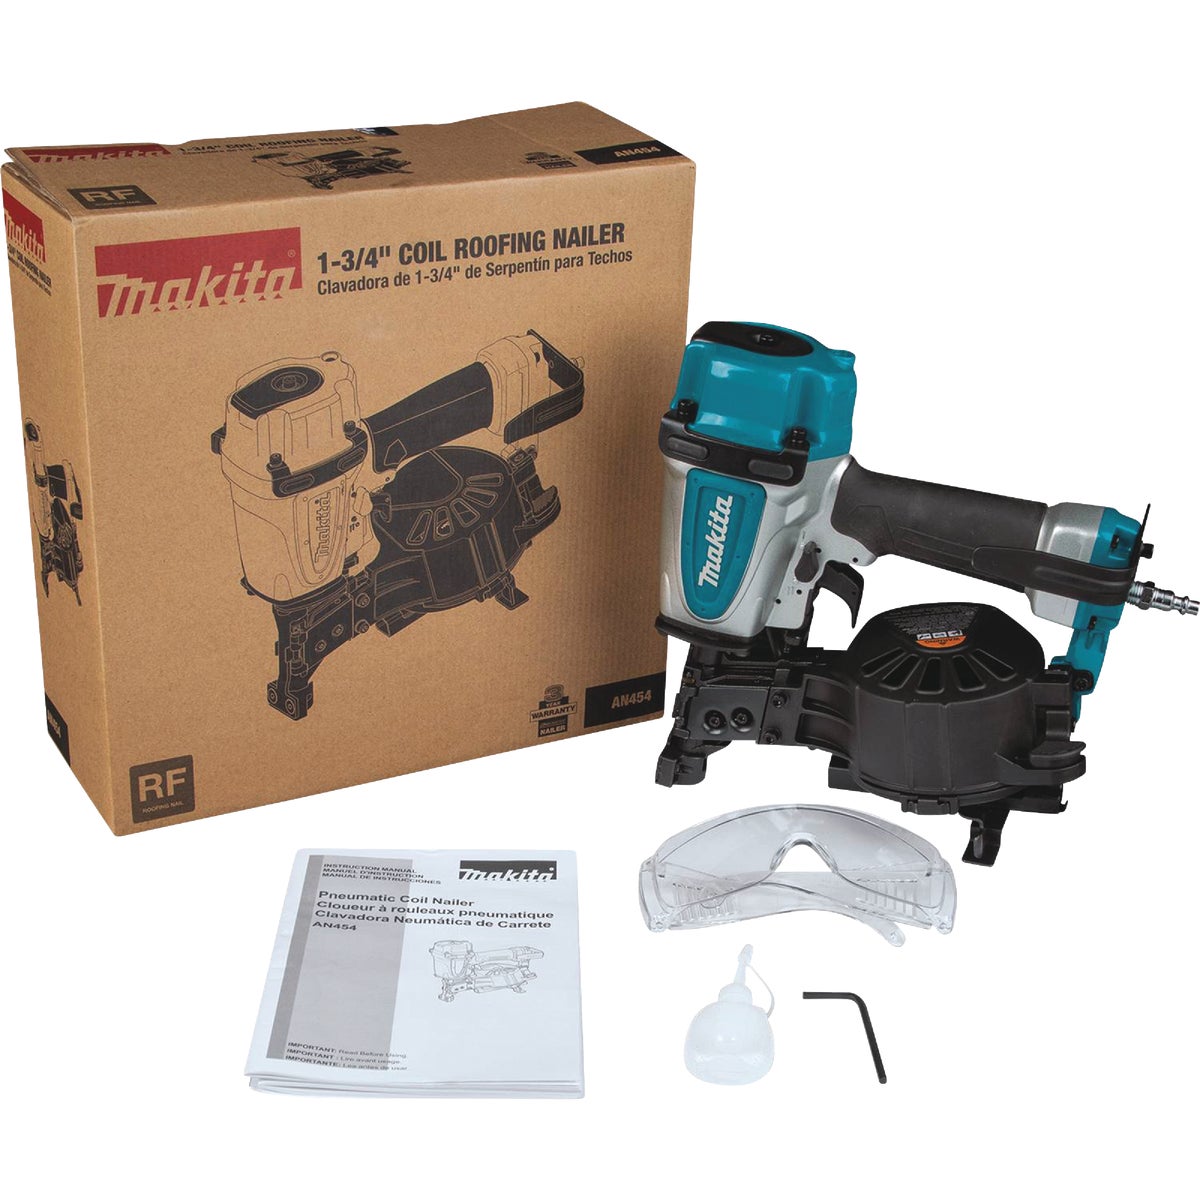 Makita Straight 1-3/4 In. Coil Roofing Nailer